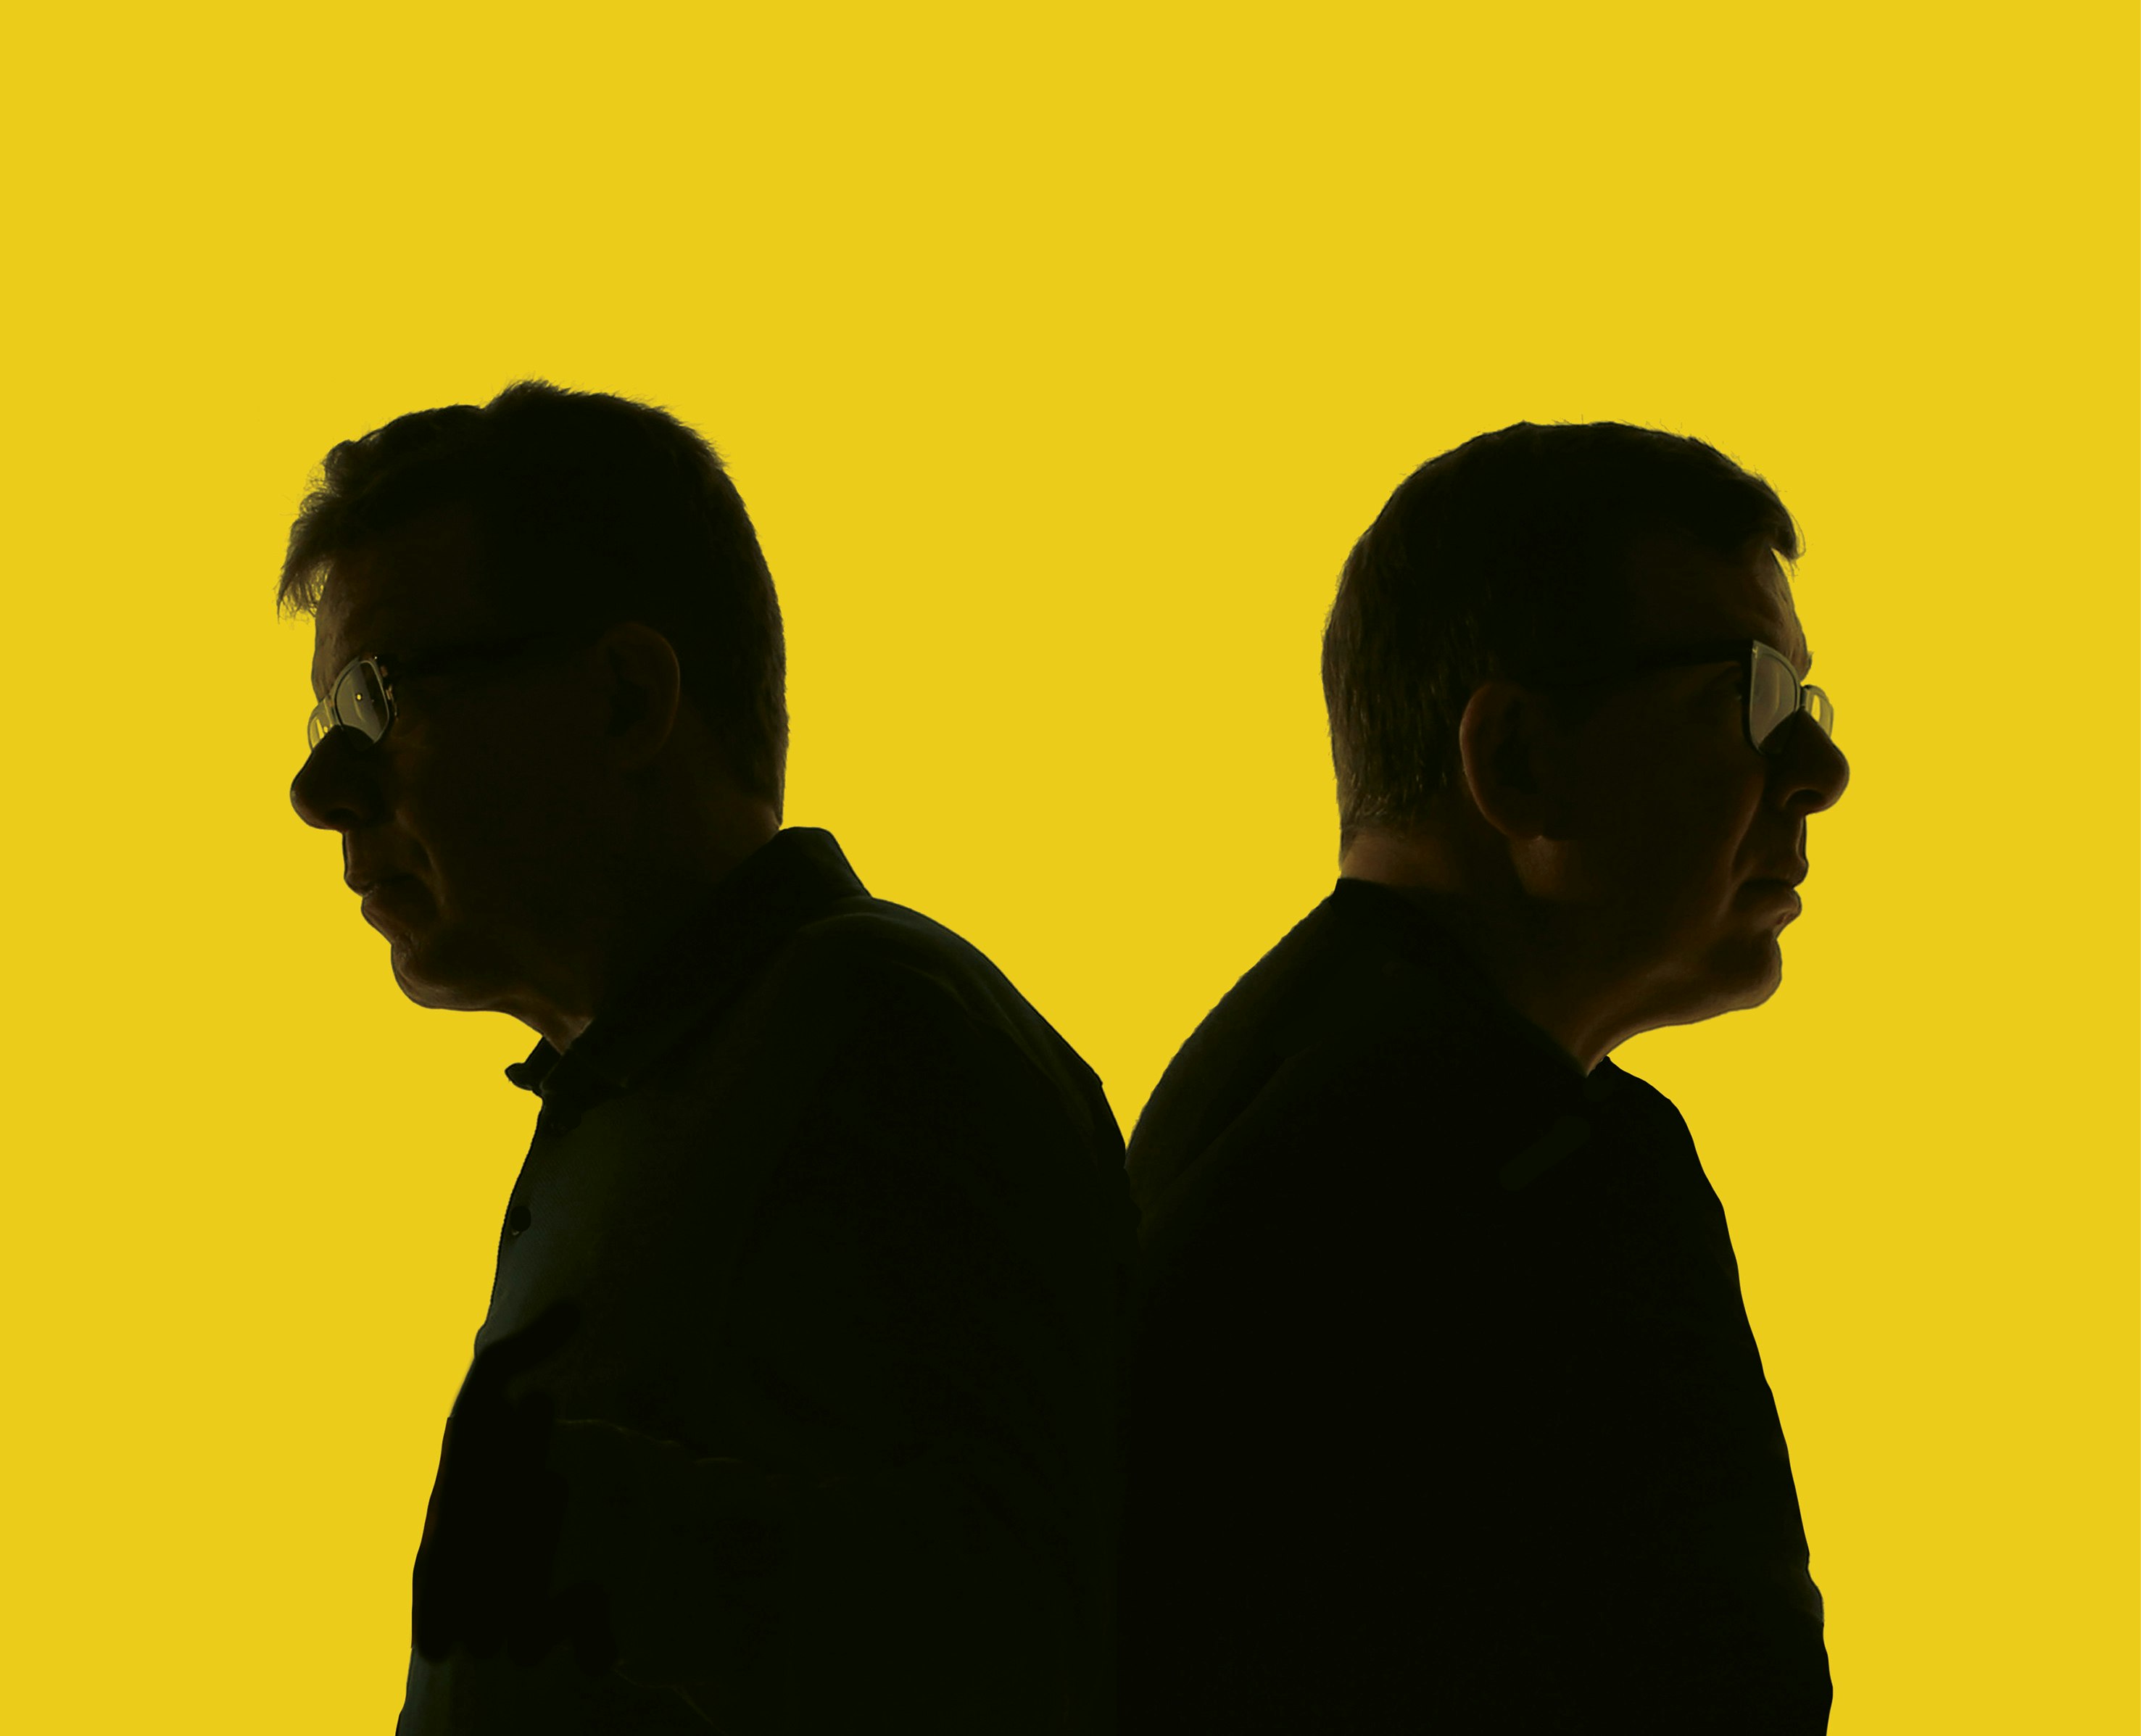 Image of the proclaimers on a yellow background